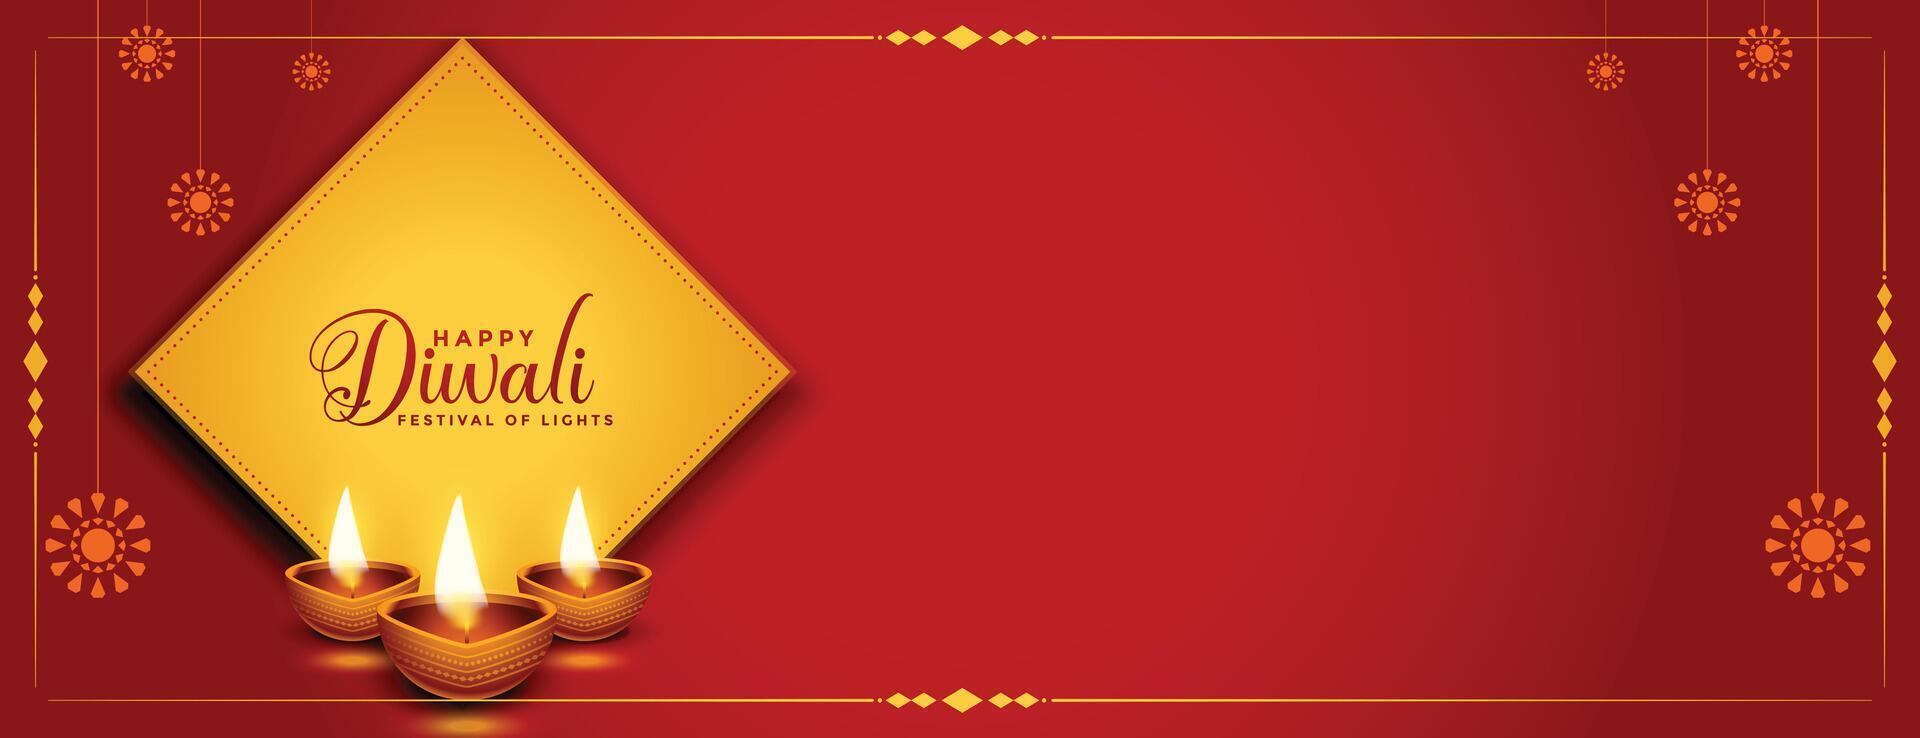 happy diwali red banner with text space vector